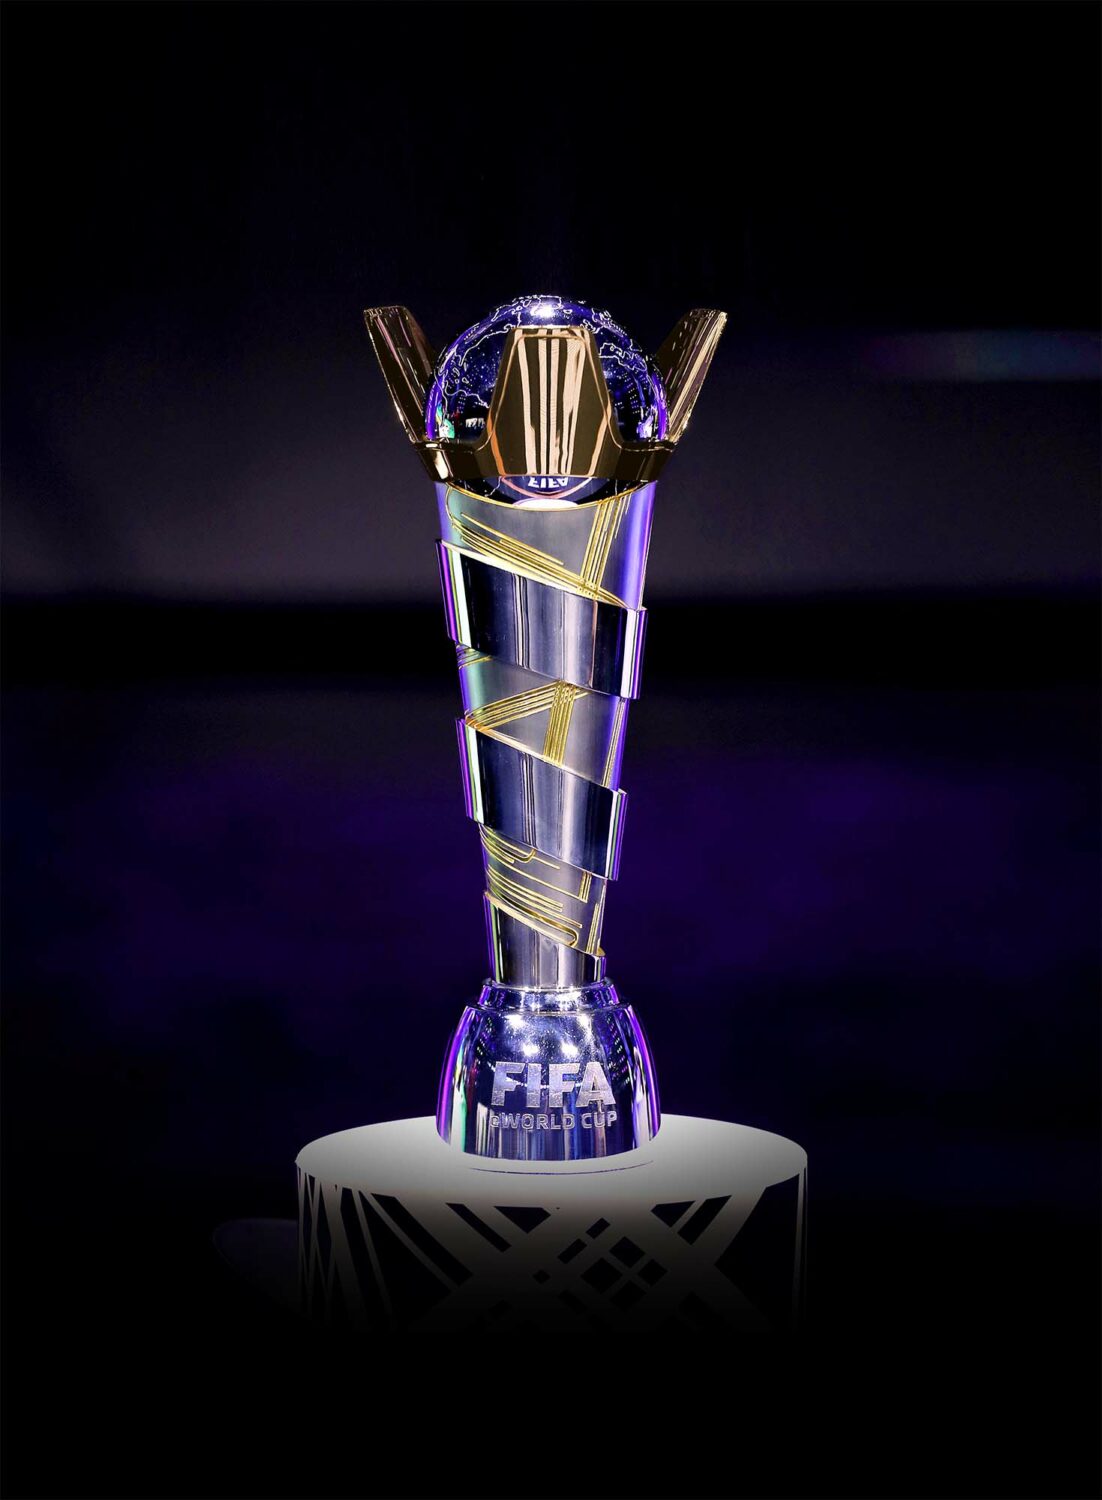 Designers and Makers of the FIFAe World Cup Trophy - Thomas Lyte